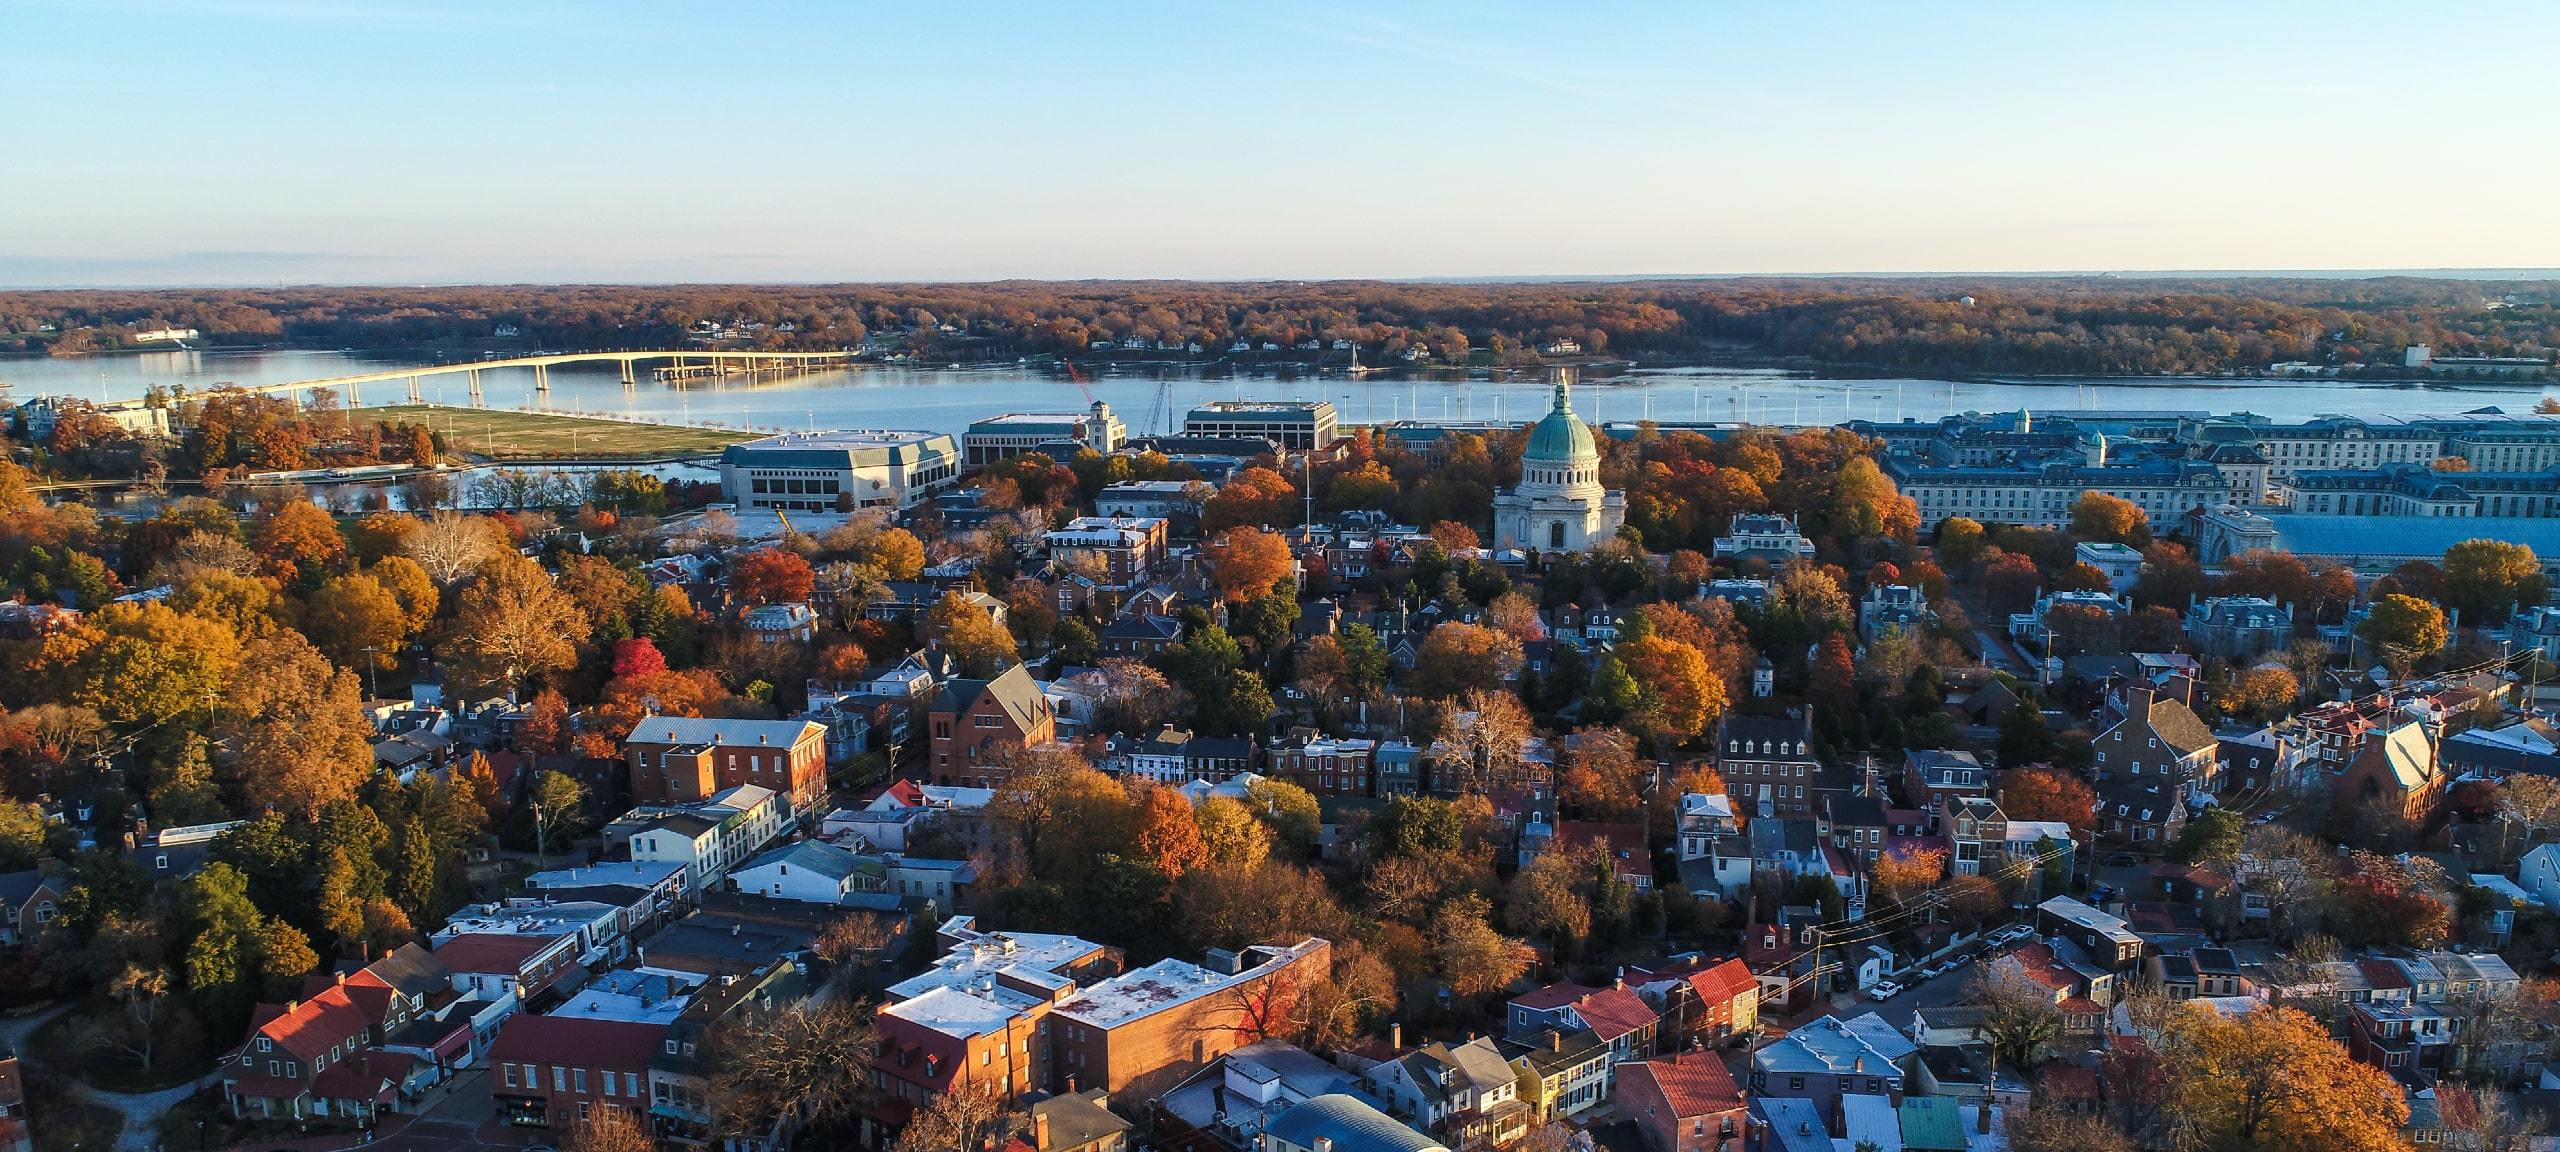 Aerial view of historic downtown of Annapolis, Maryland